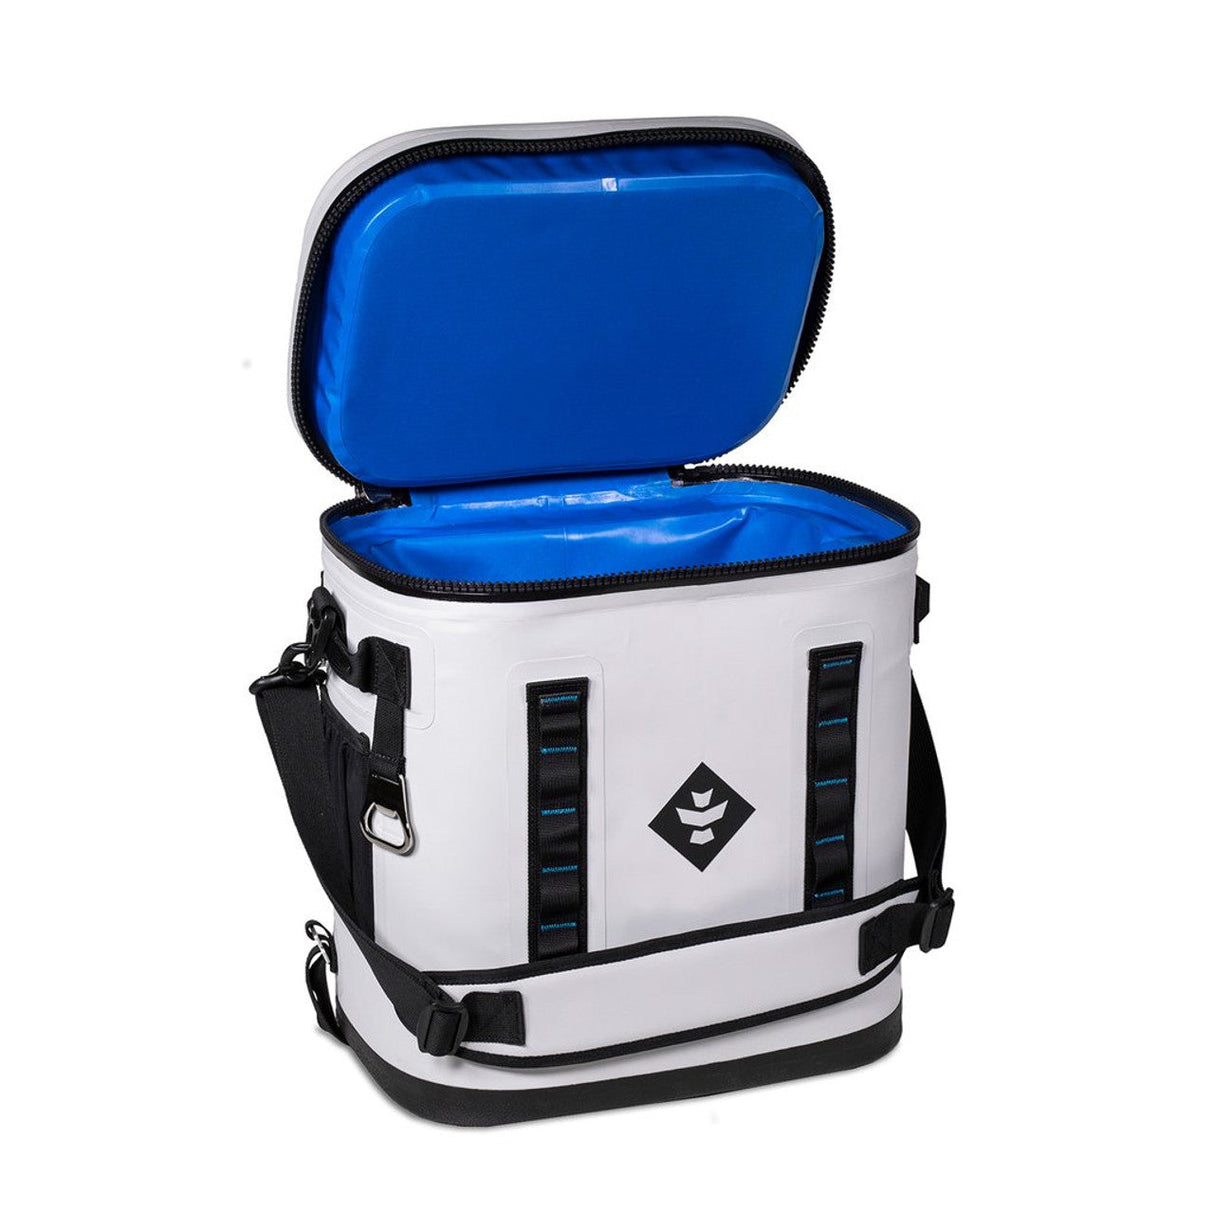 Revelry Supply - The Nomad Soft Cooler Backpack open view showcasing spacious, smell-proof interior